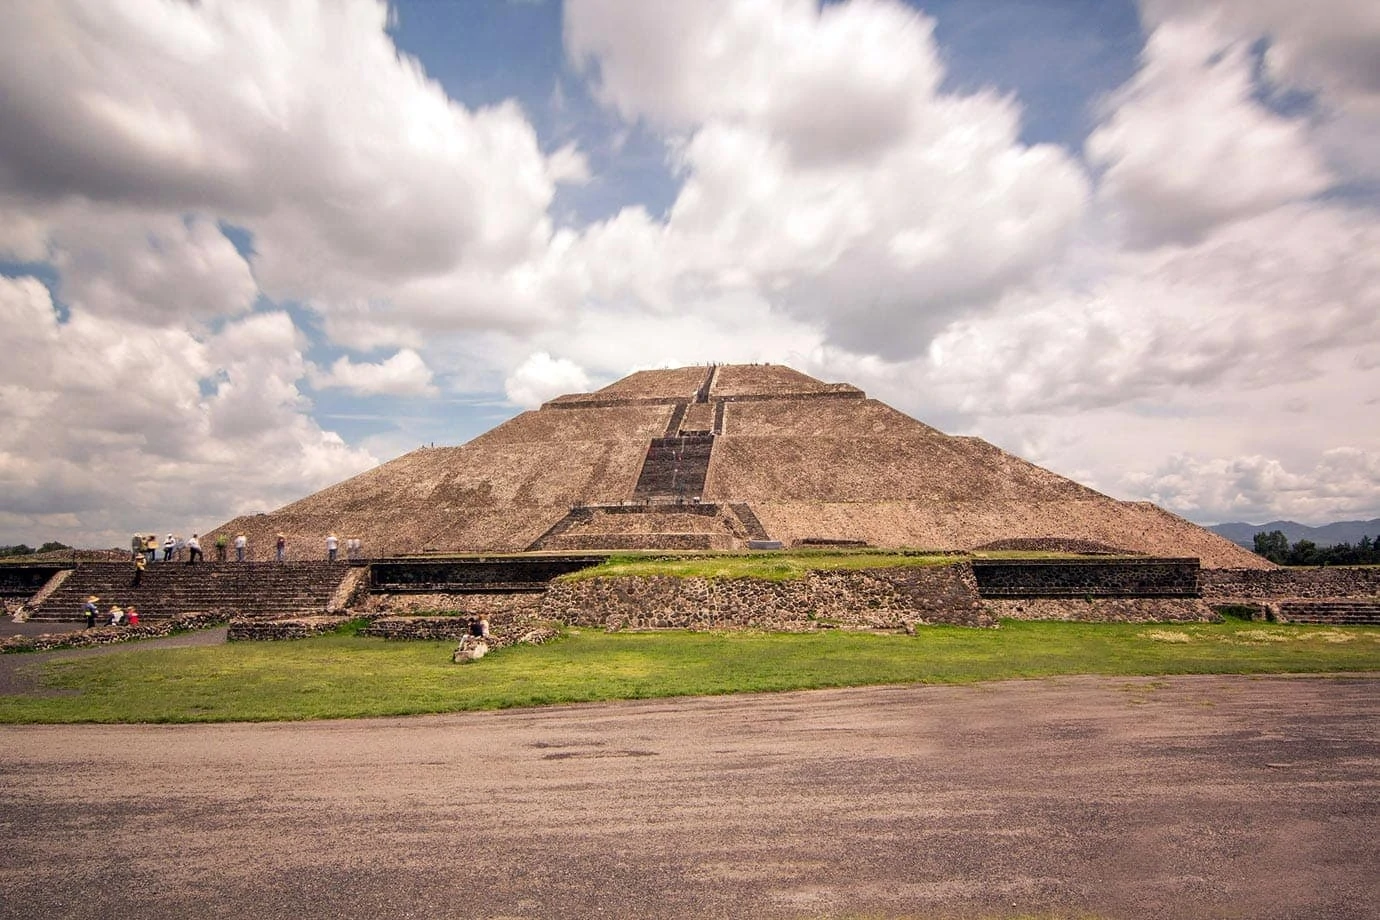 The Pyramids of Teotihuacan